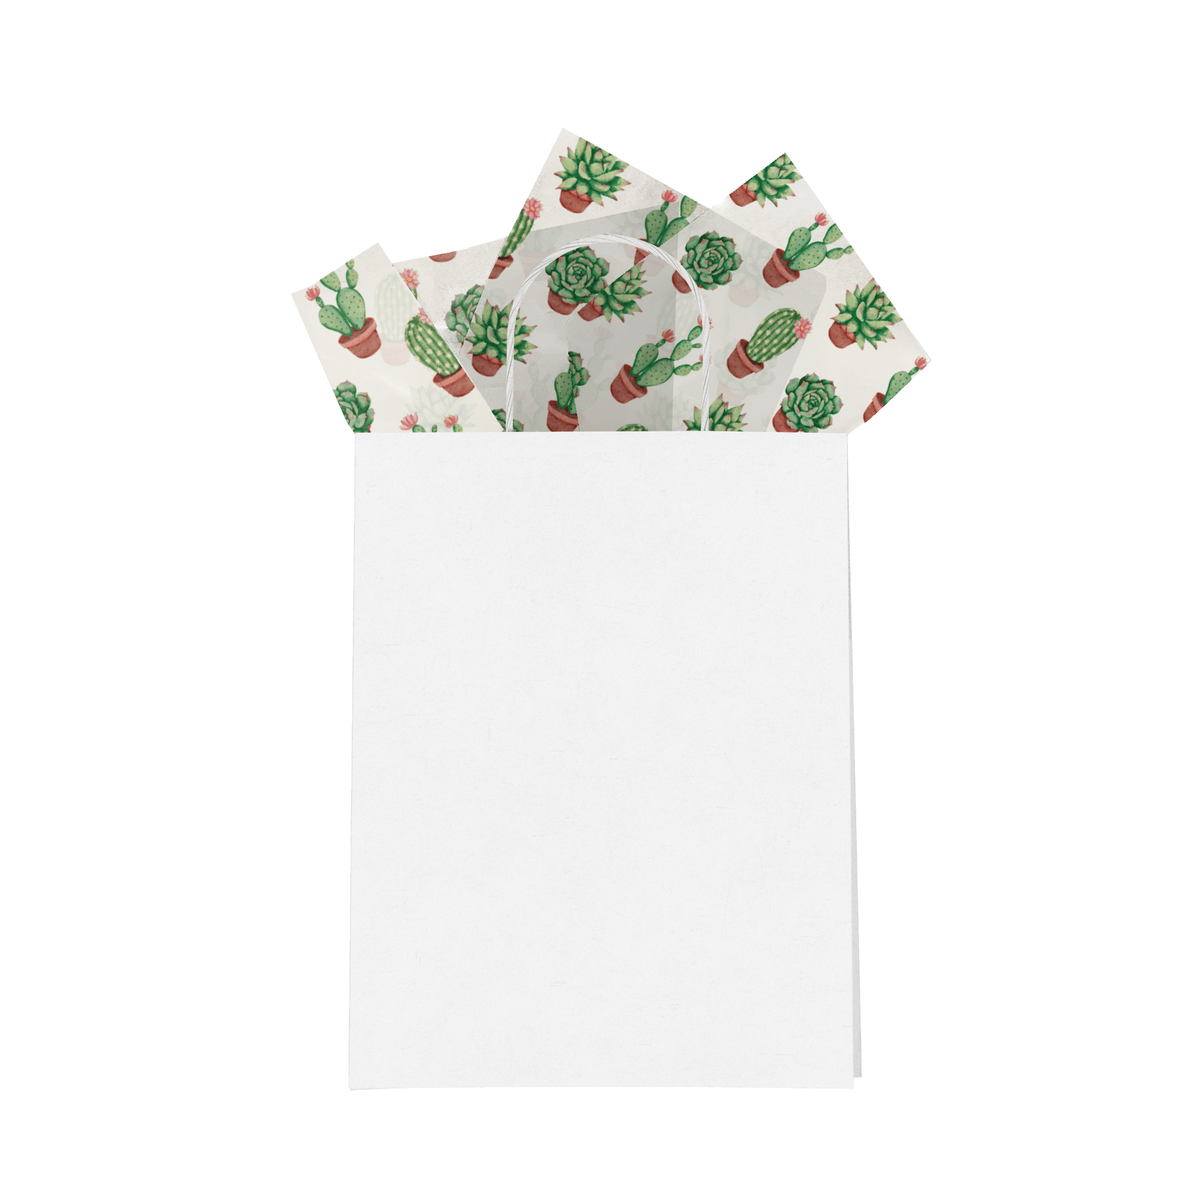 Succulents Tissue Paper for Gift Bags - Pro Supply Global